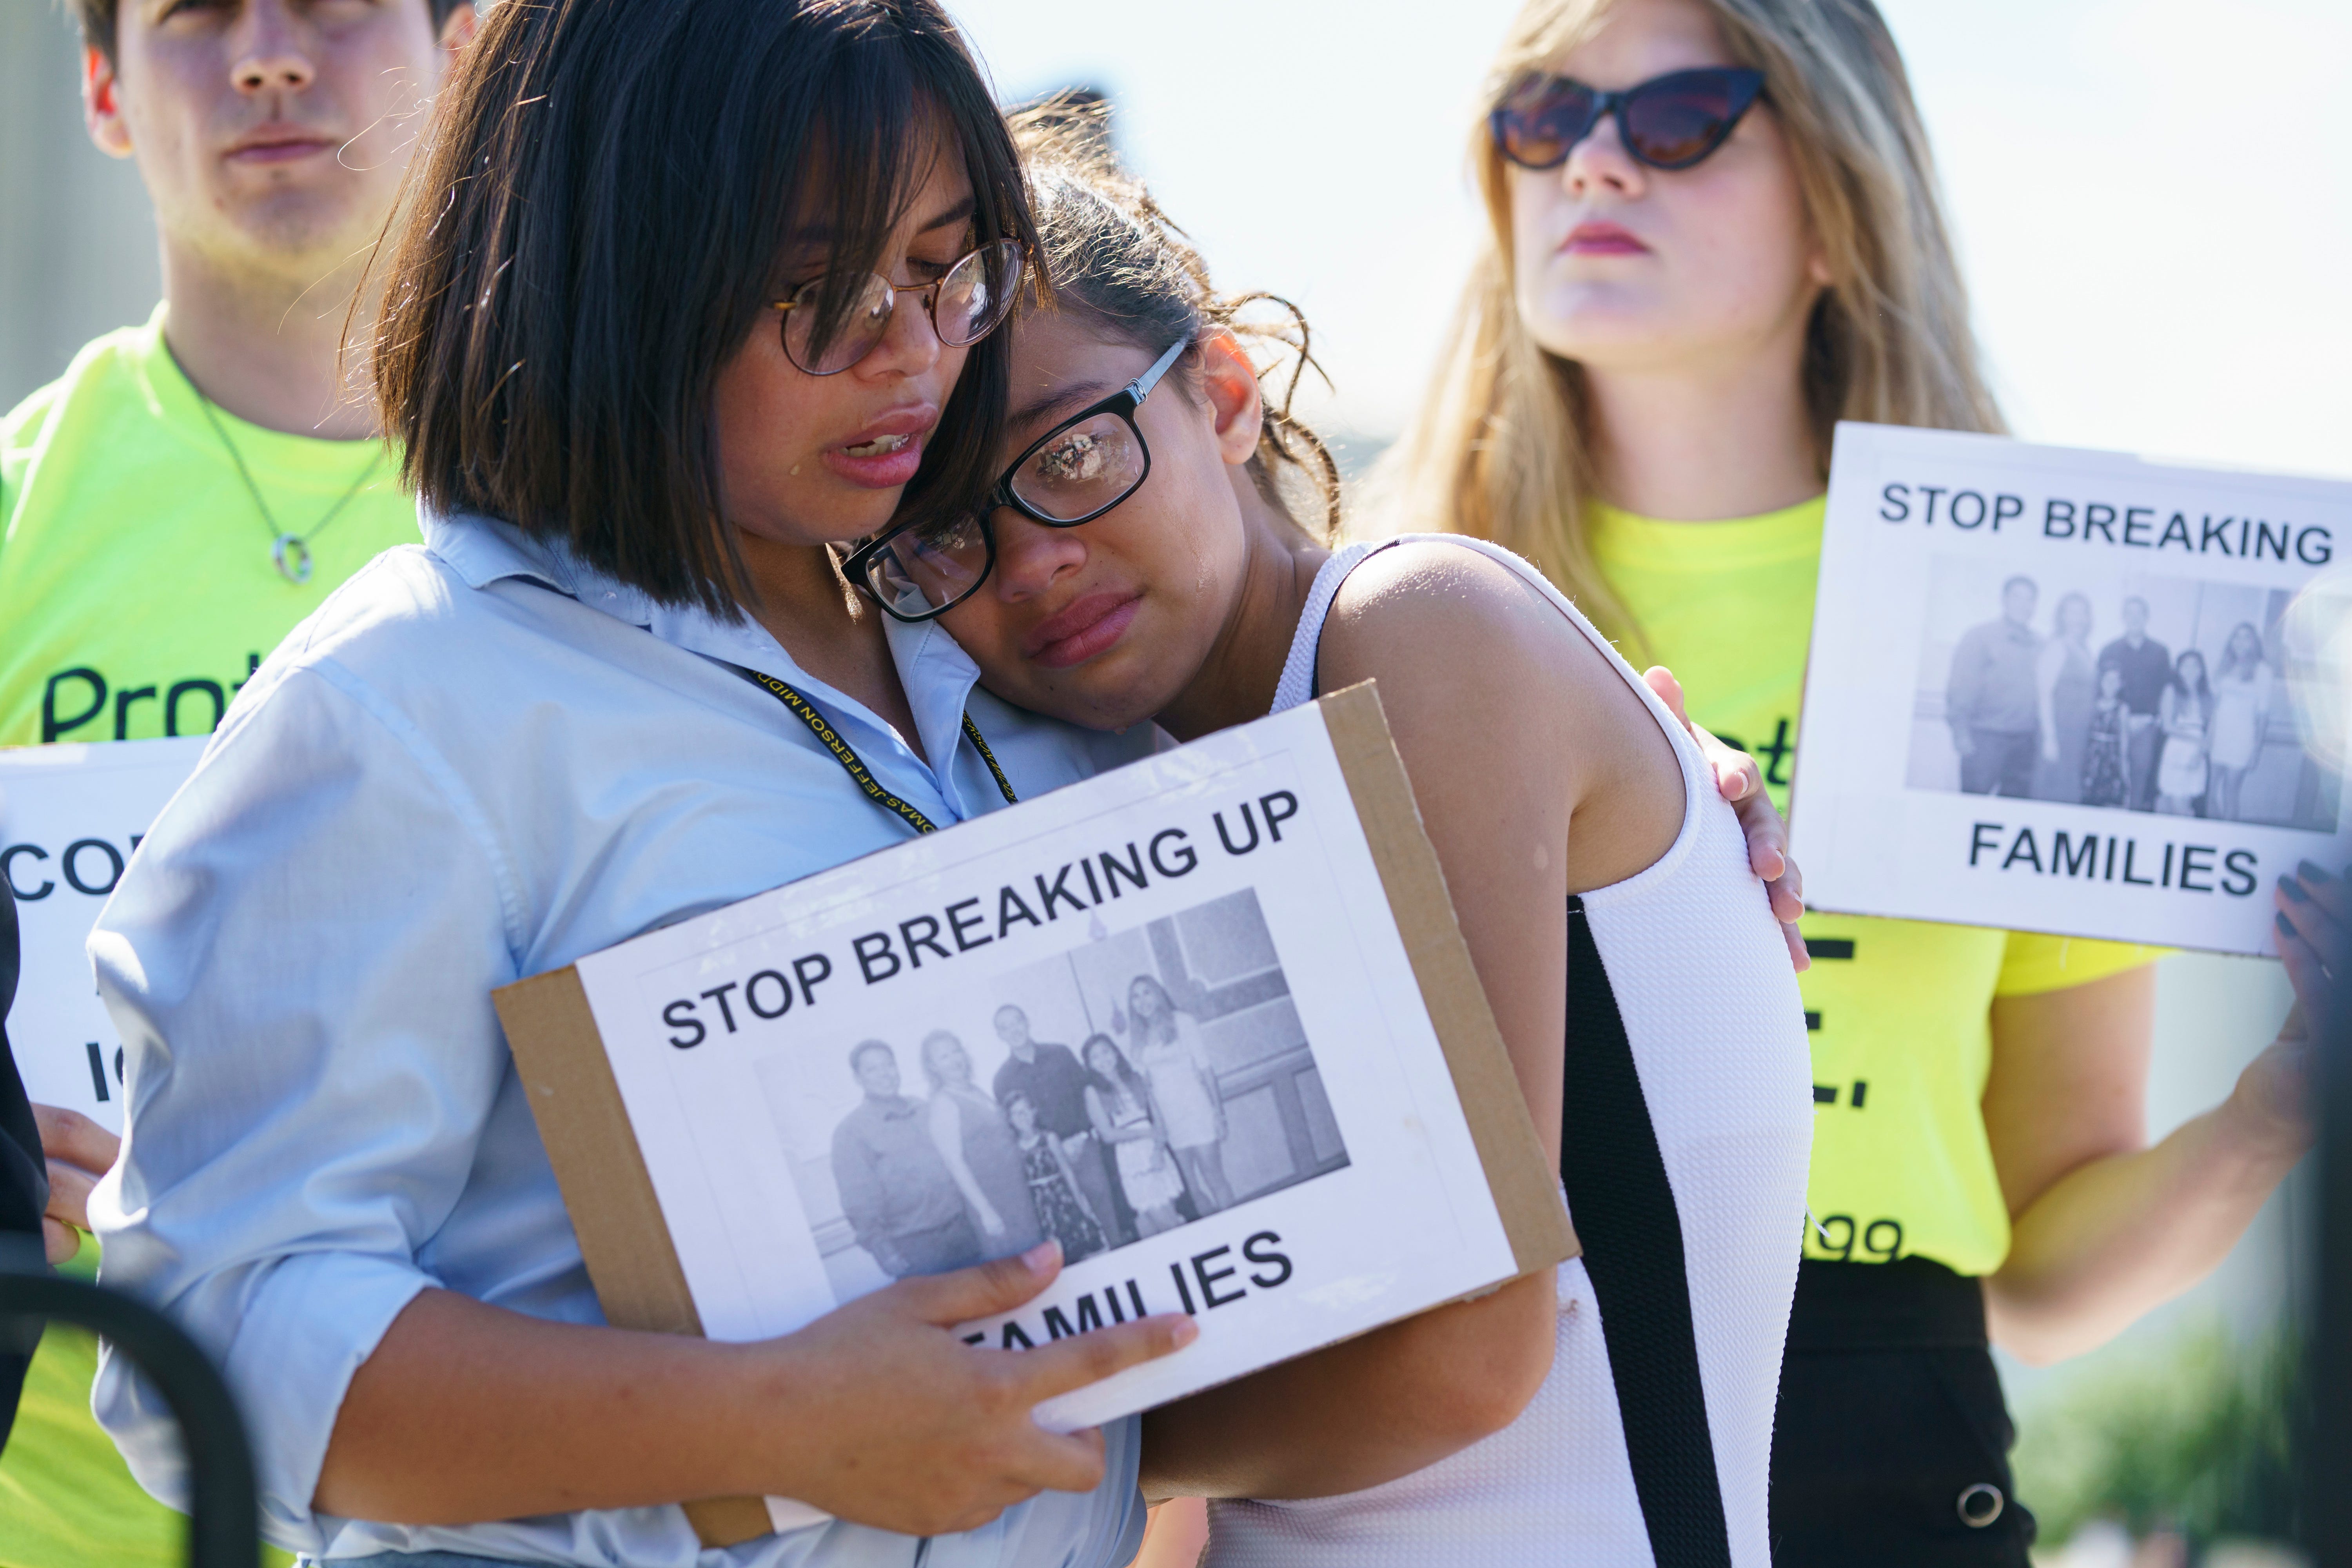 Nicole Edralin, 15, left, comforts her sister Michelle Edralin, 12, both of Highland Park, N.J., as they protest outside the Supreme Court Building on Capitol Hill in in Washington,  June 26, 2018. Their father Cloyd is currently being detained by IC